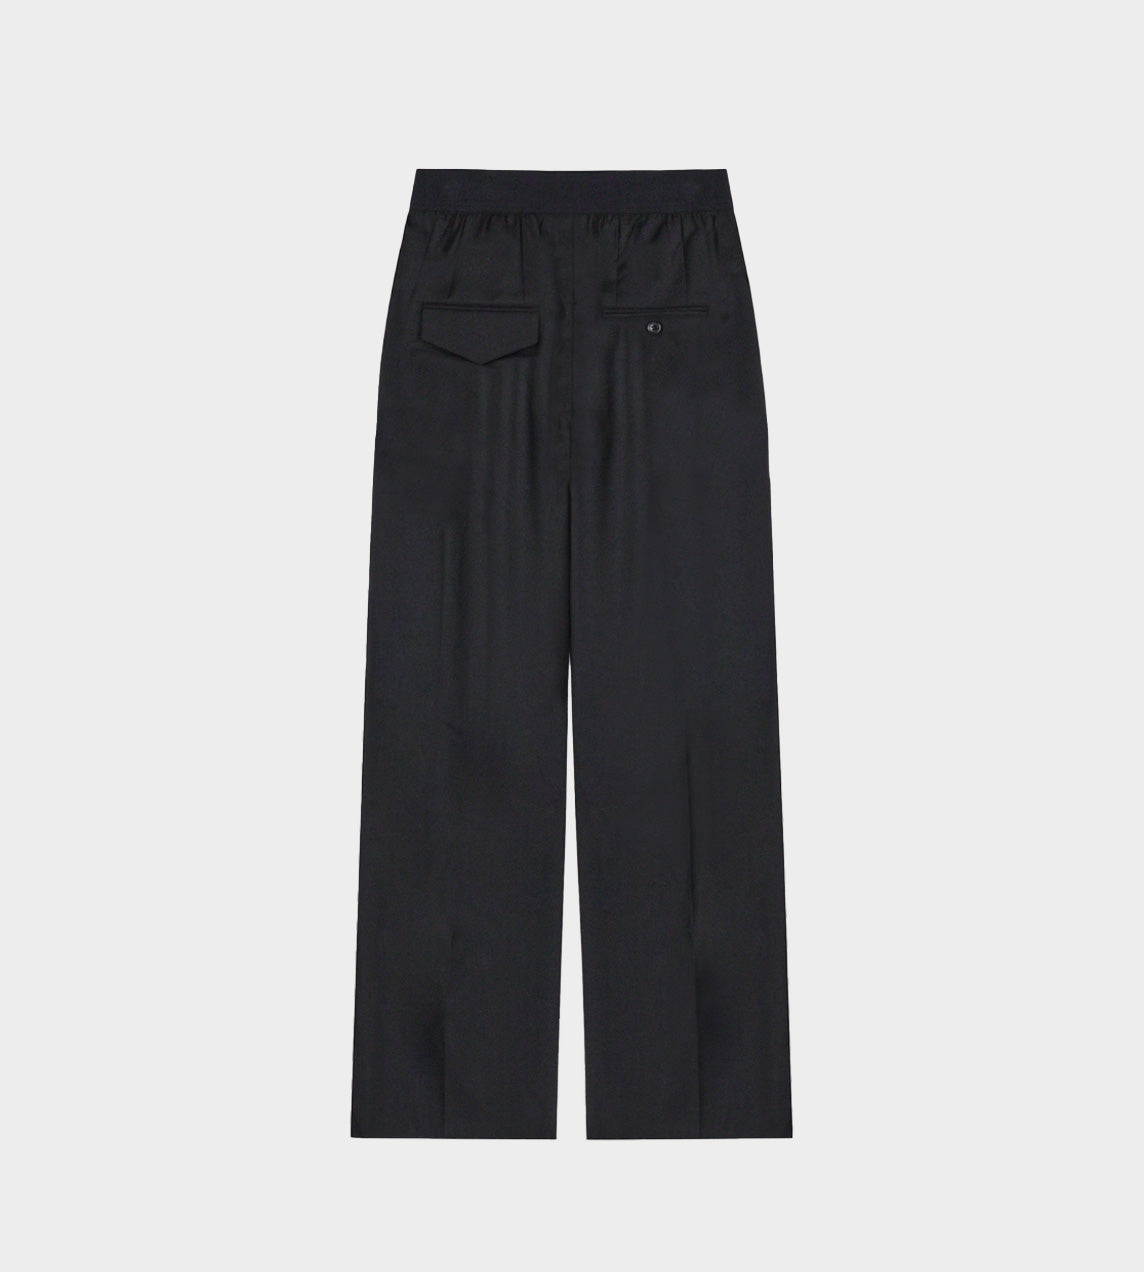 WE11DONE - Logo Trousers Black